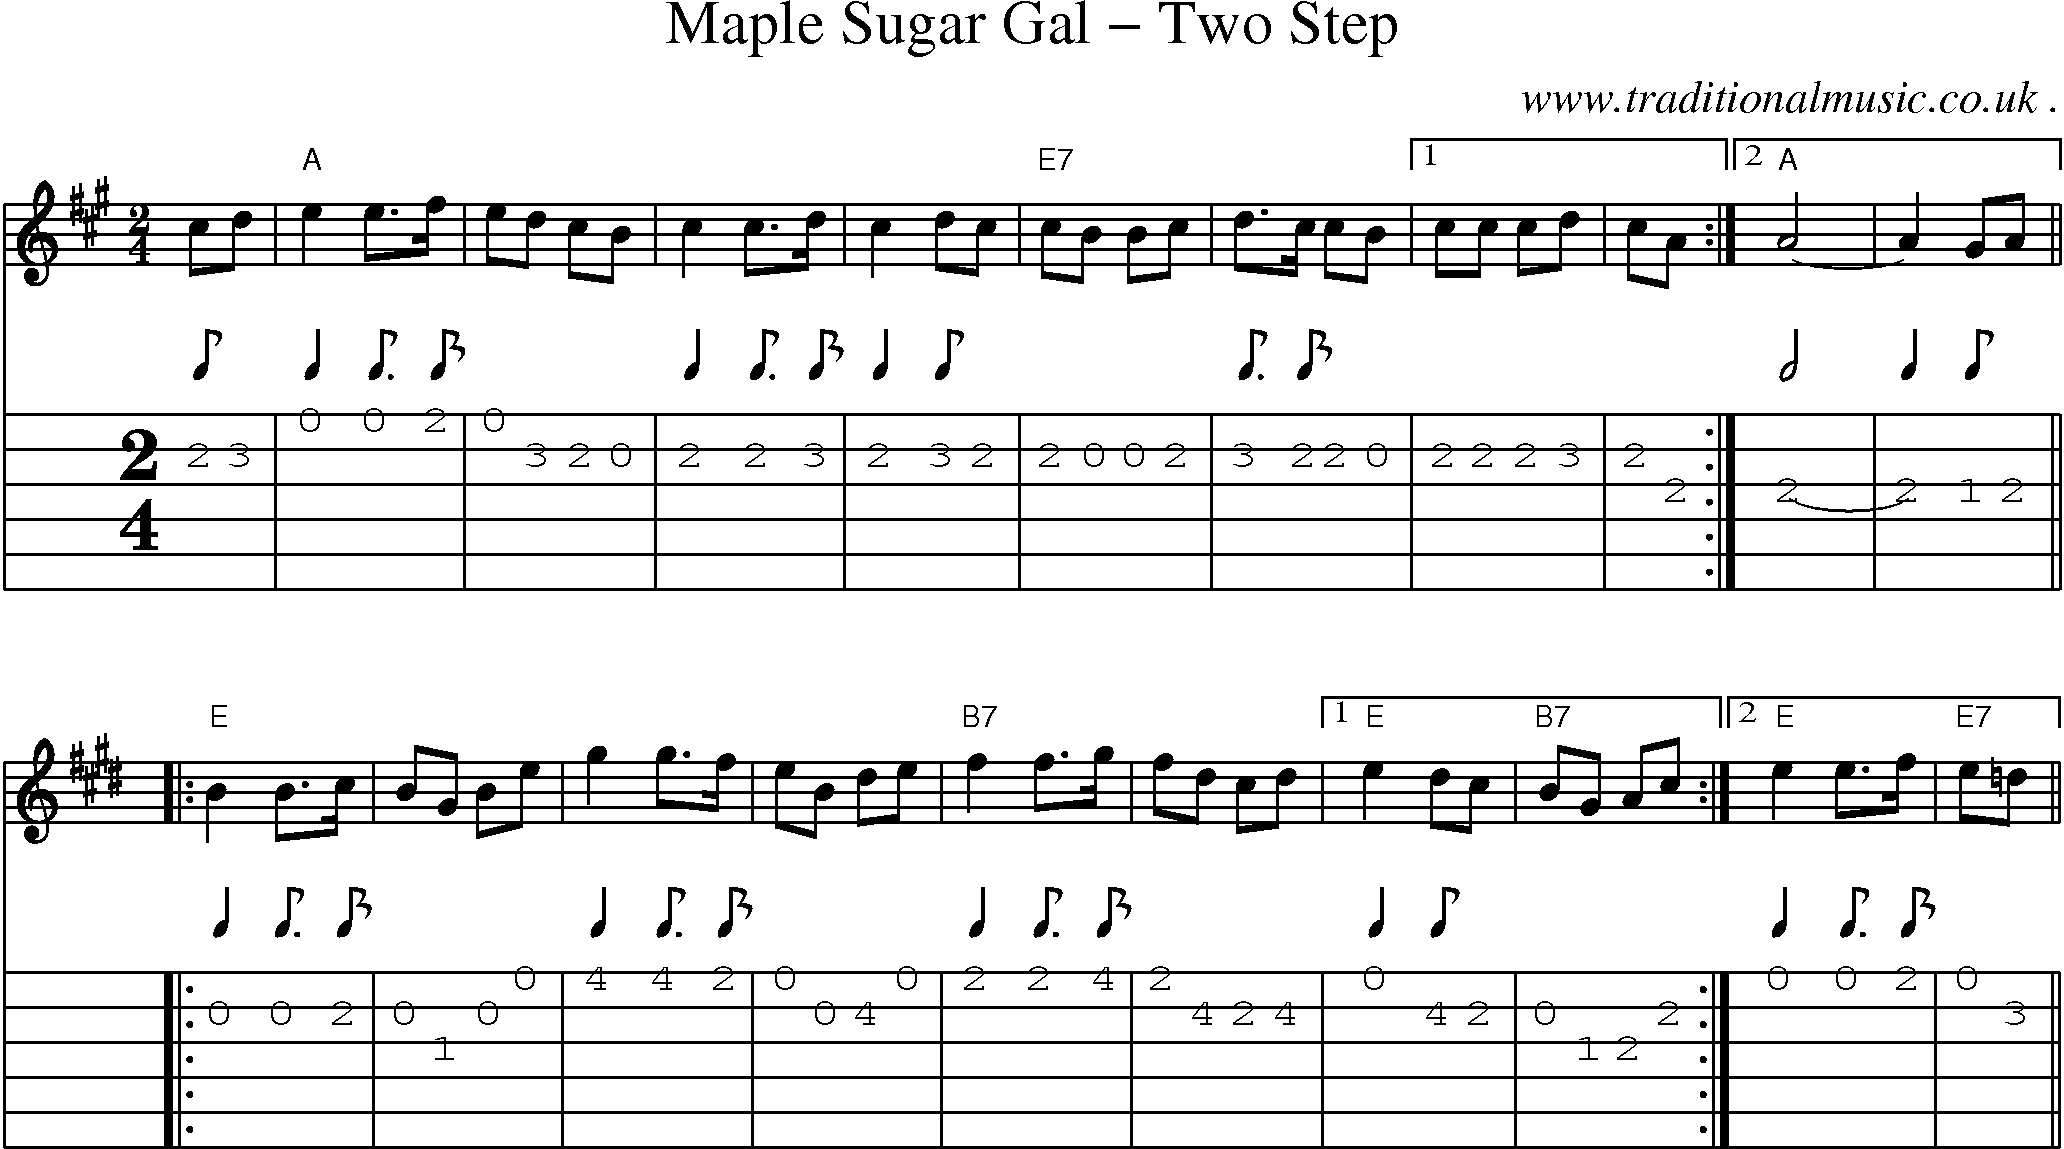 Music Score and Guitar Tabs for Maple Sugar Gal Two Step